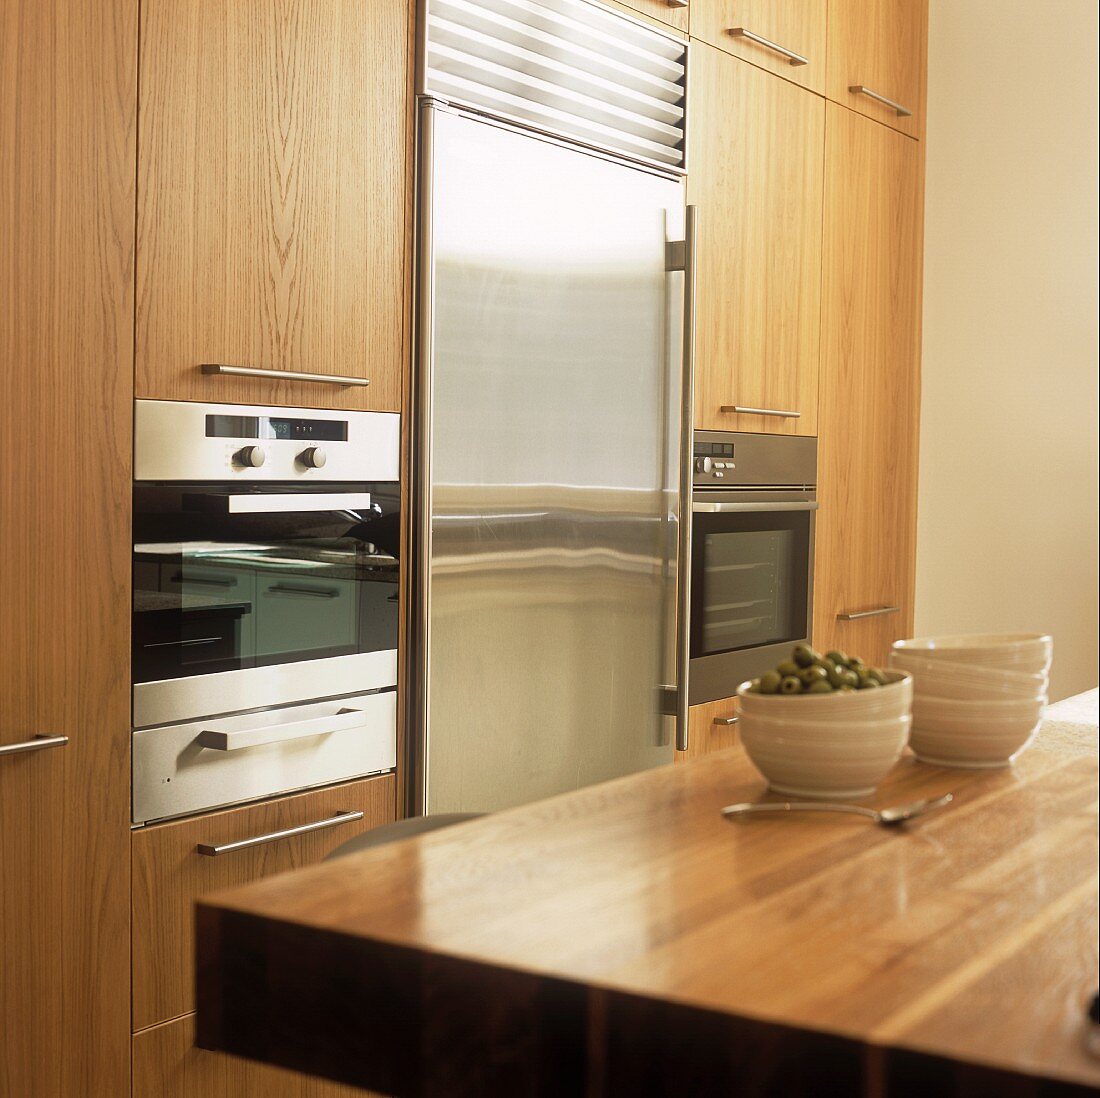 A fitted kitchen with wooden cupboards and a stainless steel fridge